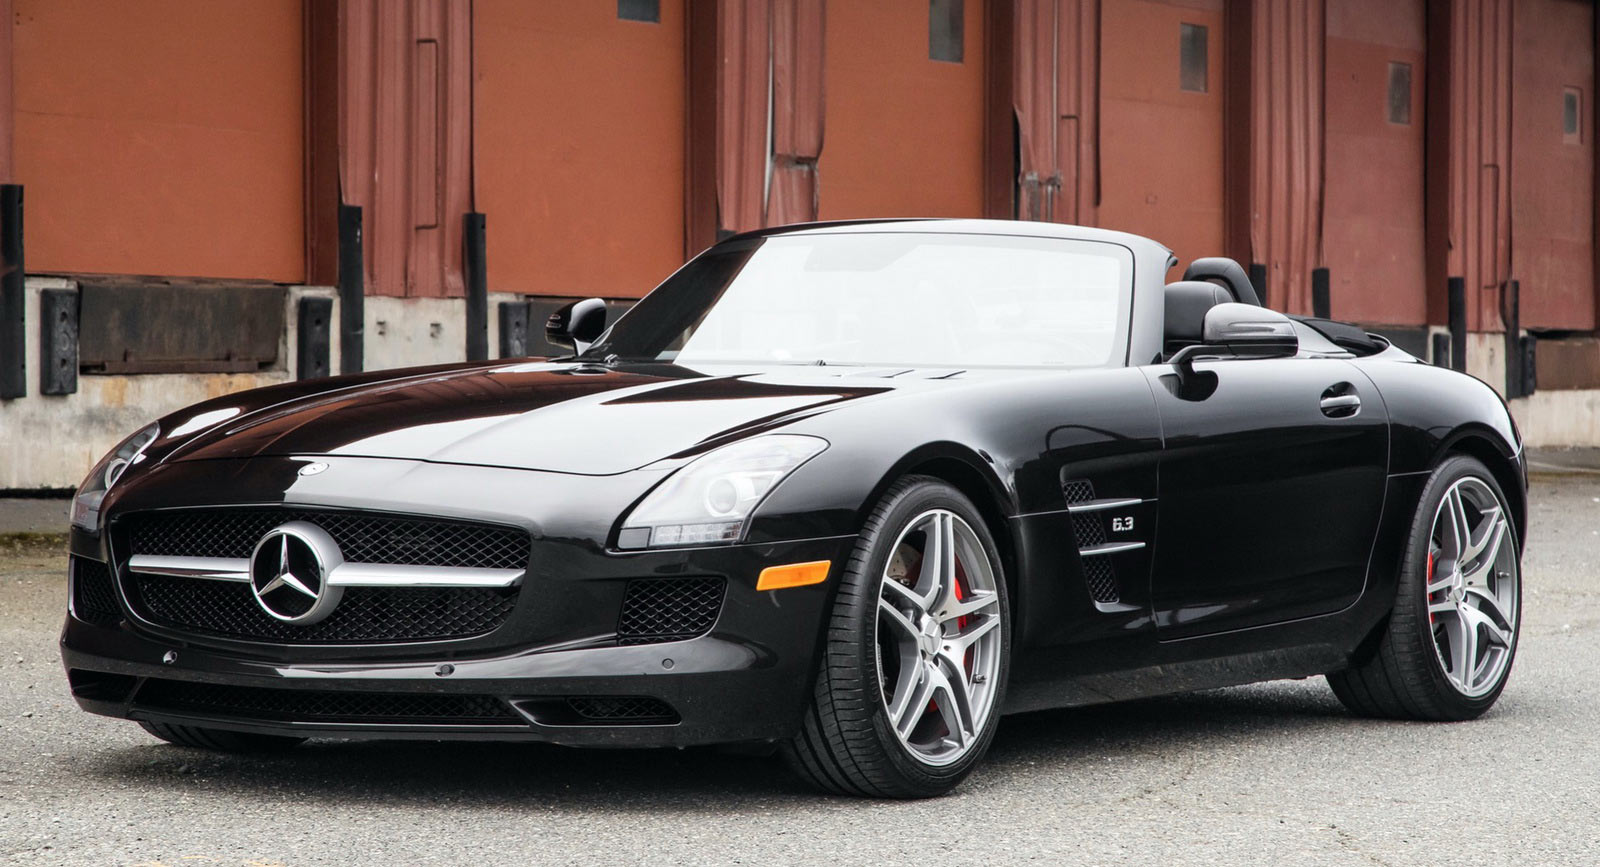 Overtreden rooster Correspondentie 7K-Mile Mercedes SLS AMG Roadster Is The Perfect Trophy Car | Carscoops